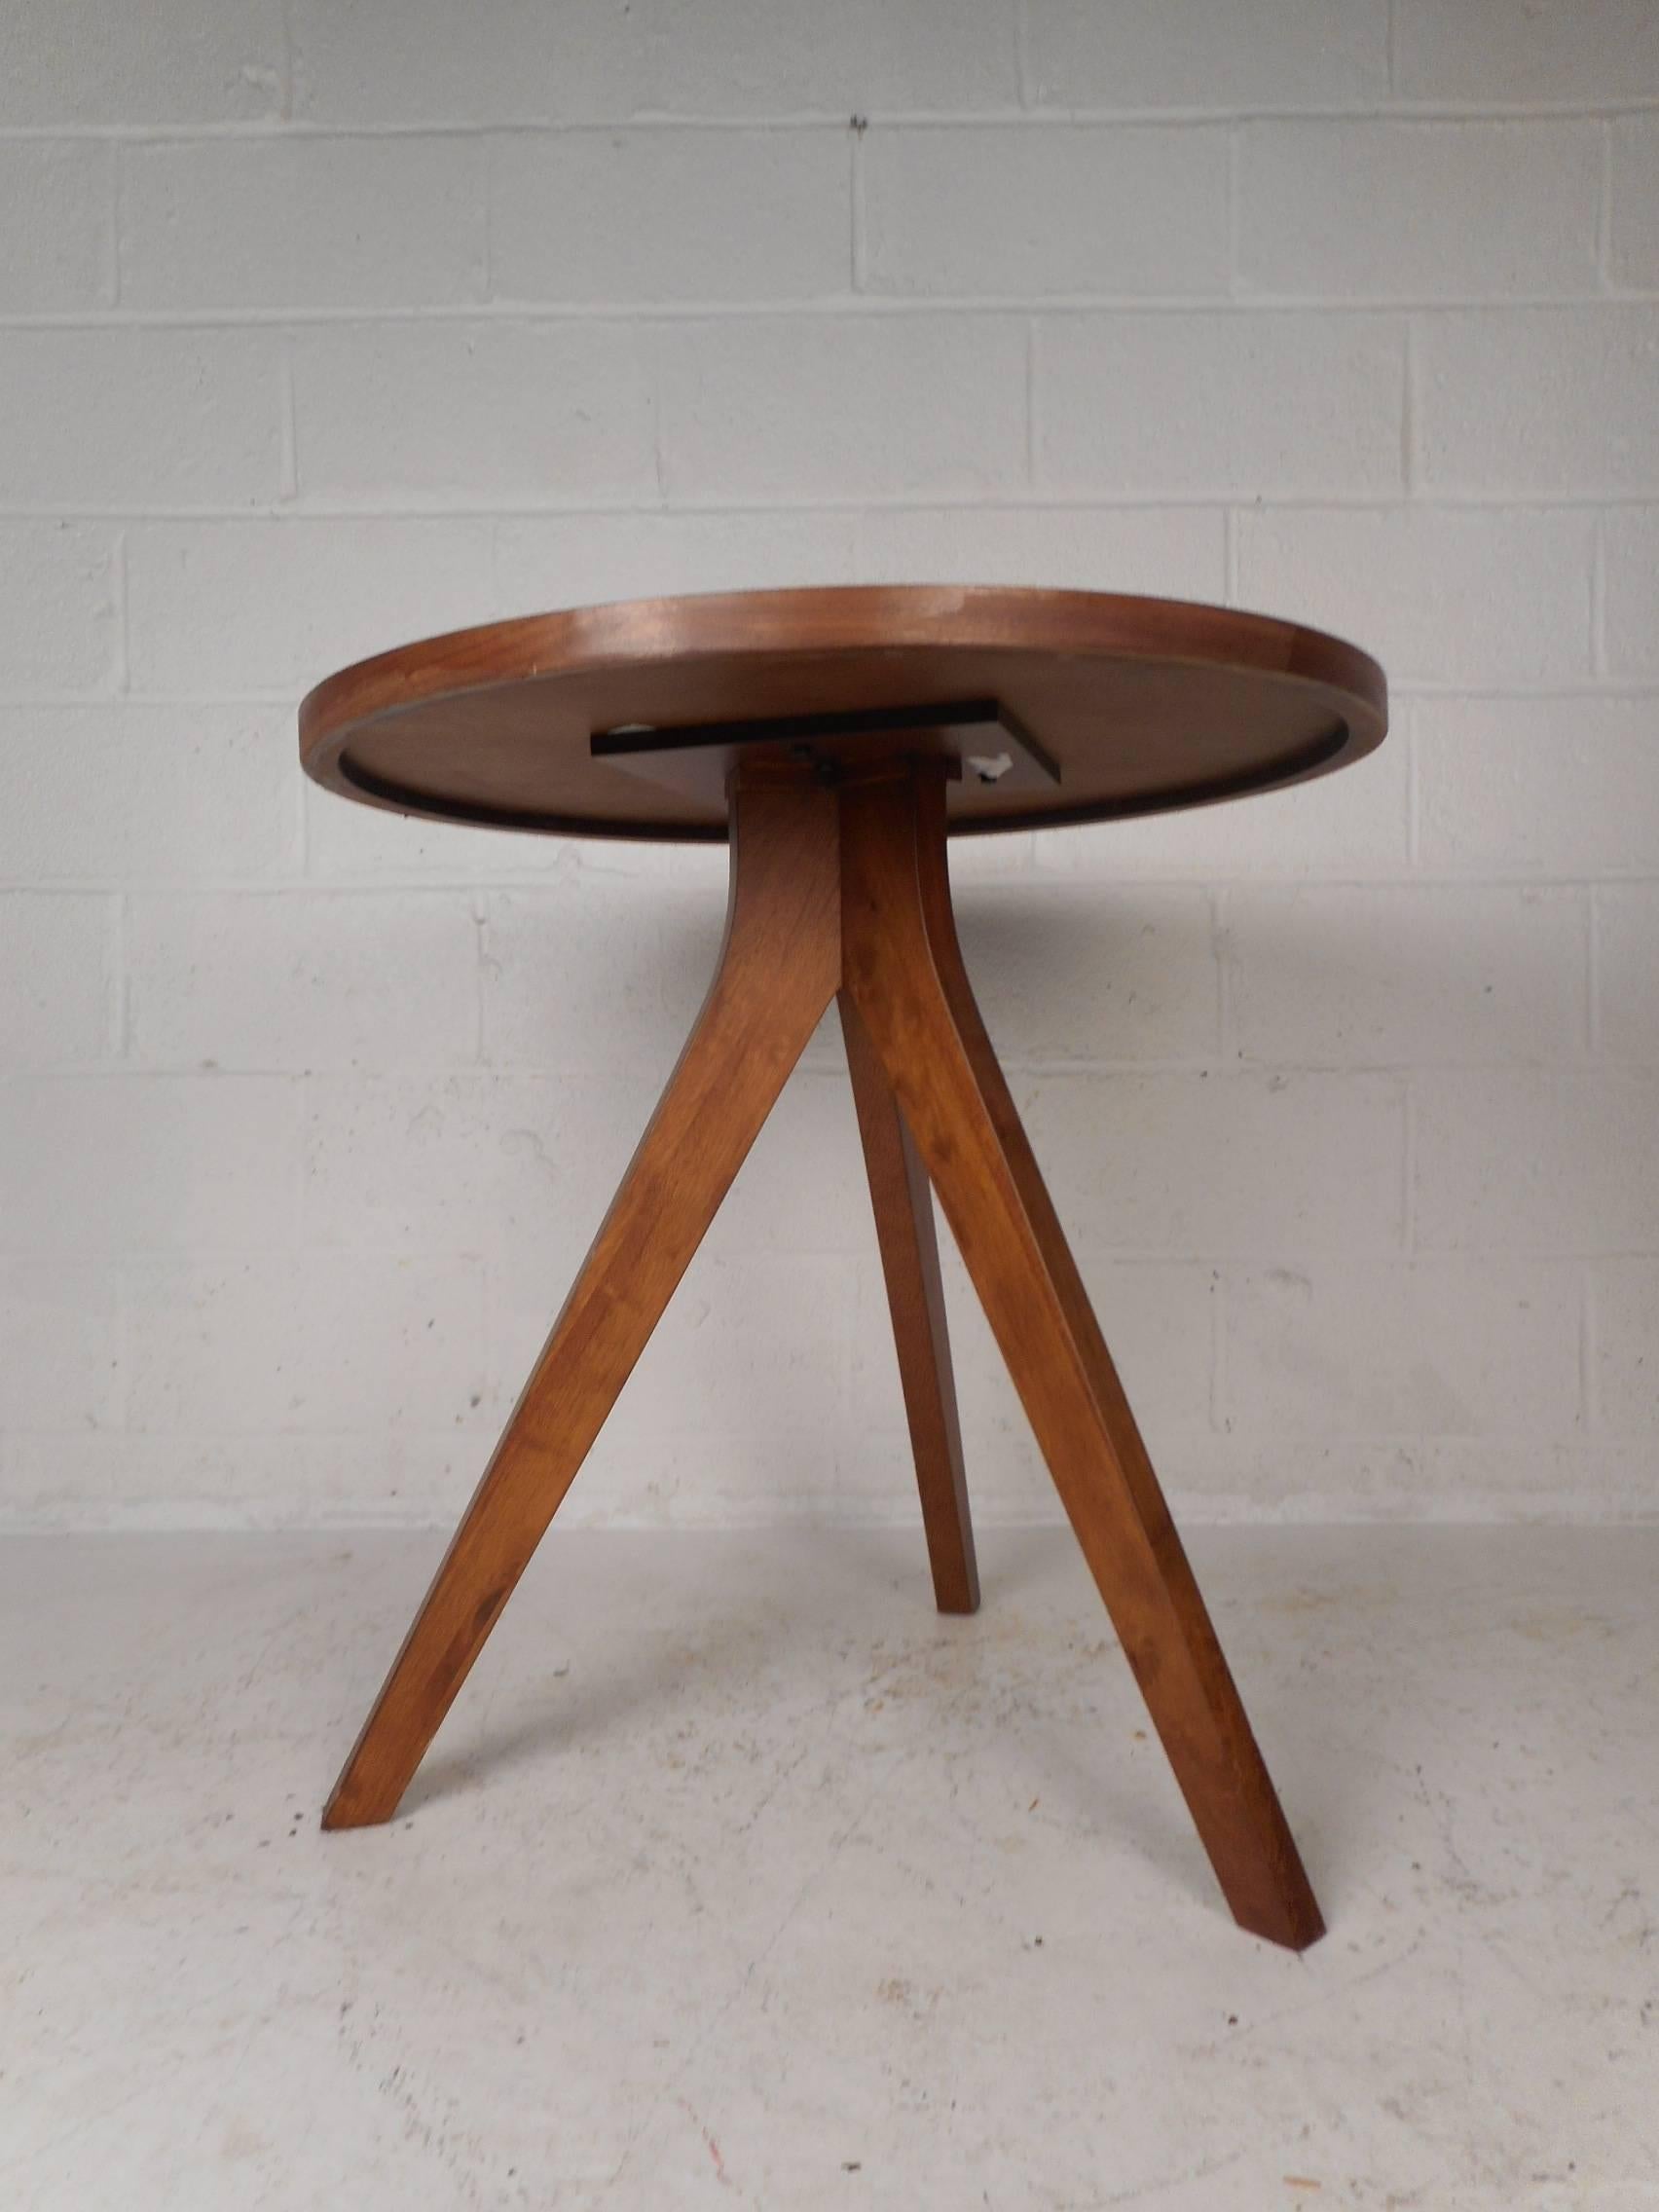 This beautiful Mid-Century Modern style kitchen table features a round top with long angled legs. Versatile design works perfectly as a pedestal, tall end table, or a game table. The sleek design has tapered and splayed legs adding to the allure.